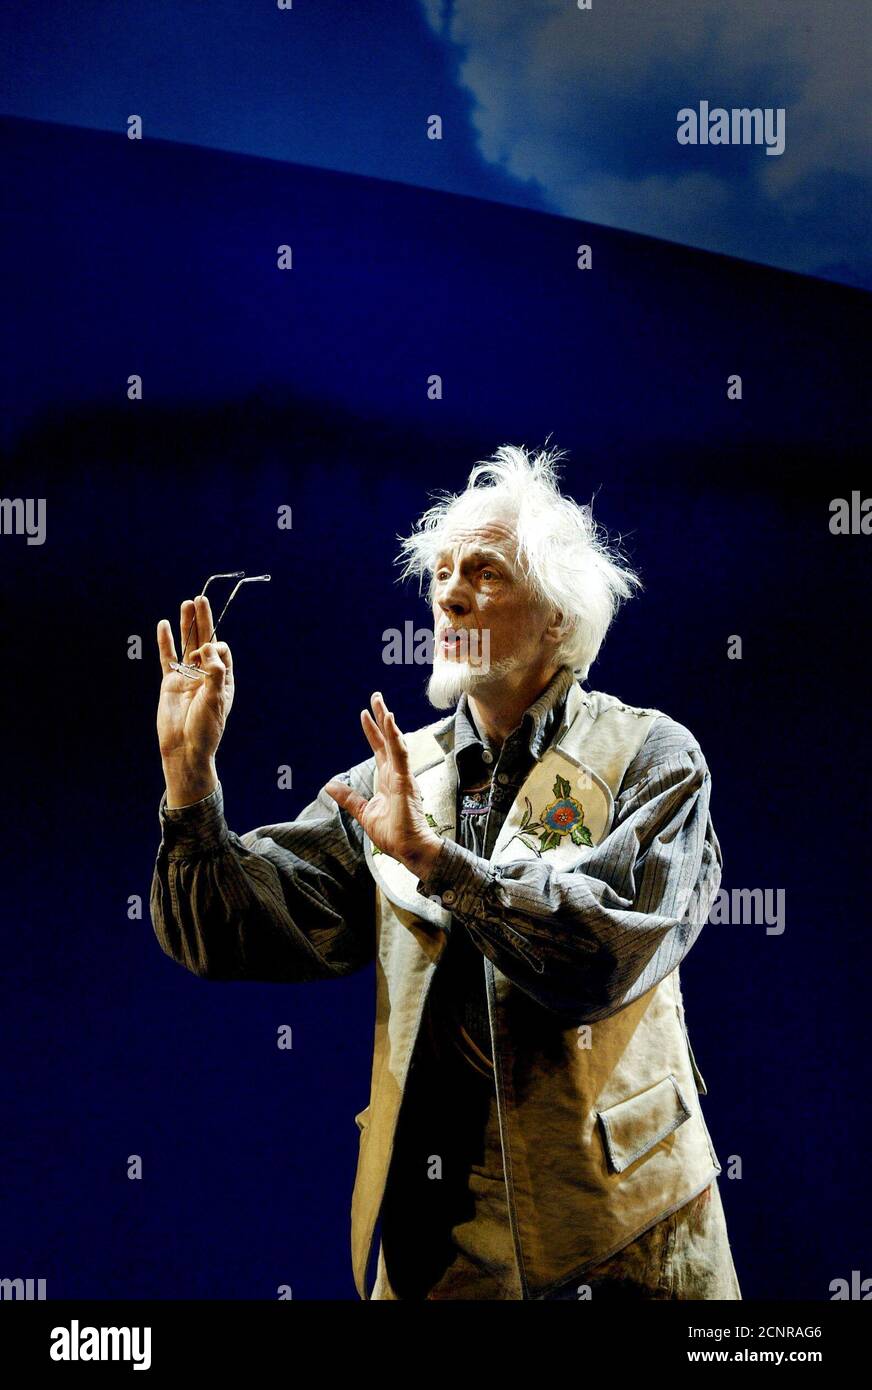 Edward Petherbridge (Coggins) in CHITTY CHITTY BANG BANG at the The London Palladium, London W1 16/04/2002   music & lyrics: Richard M Sherman & Robert B Sherman  adapted for the stage by Jeremy Sams  design: Anthony Ward  lighting: Mark Henderson  musical staging & choreography: Gillian Lynne  director: Adrian Noble Stock Photo